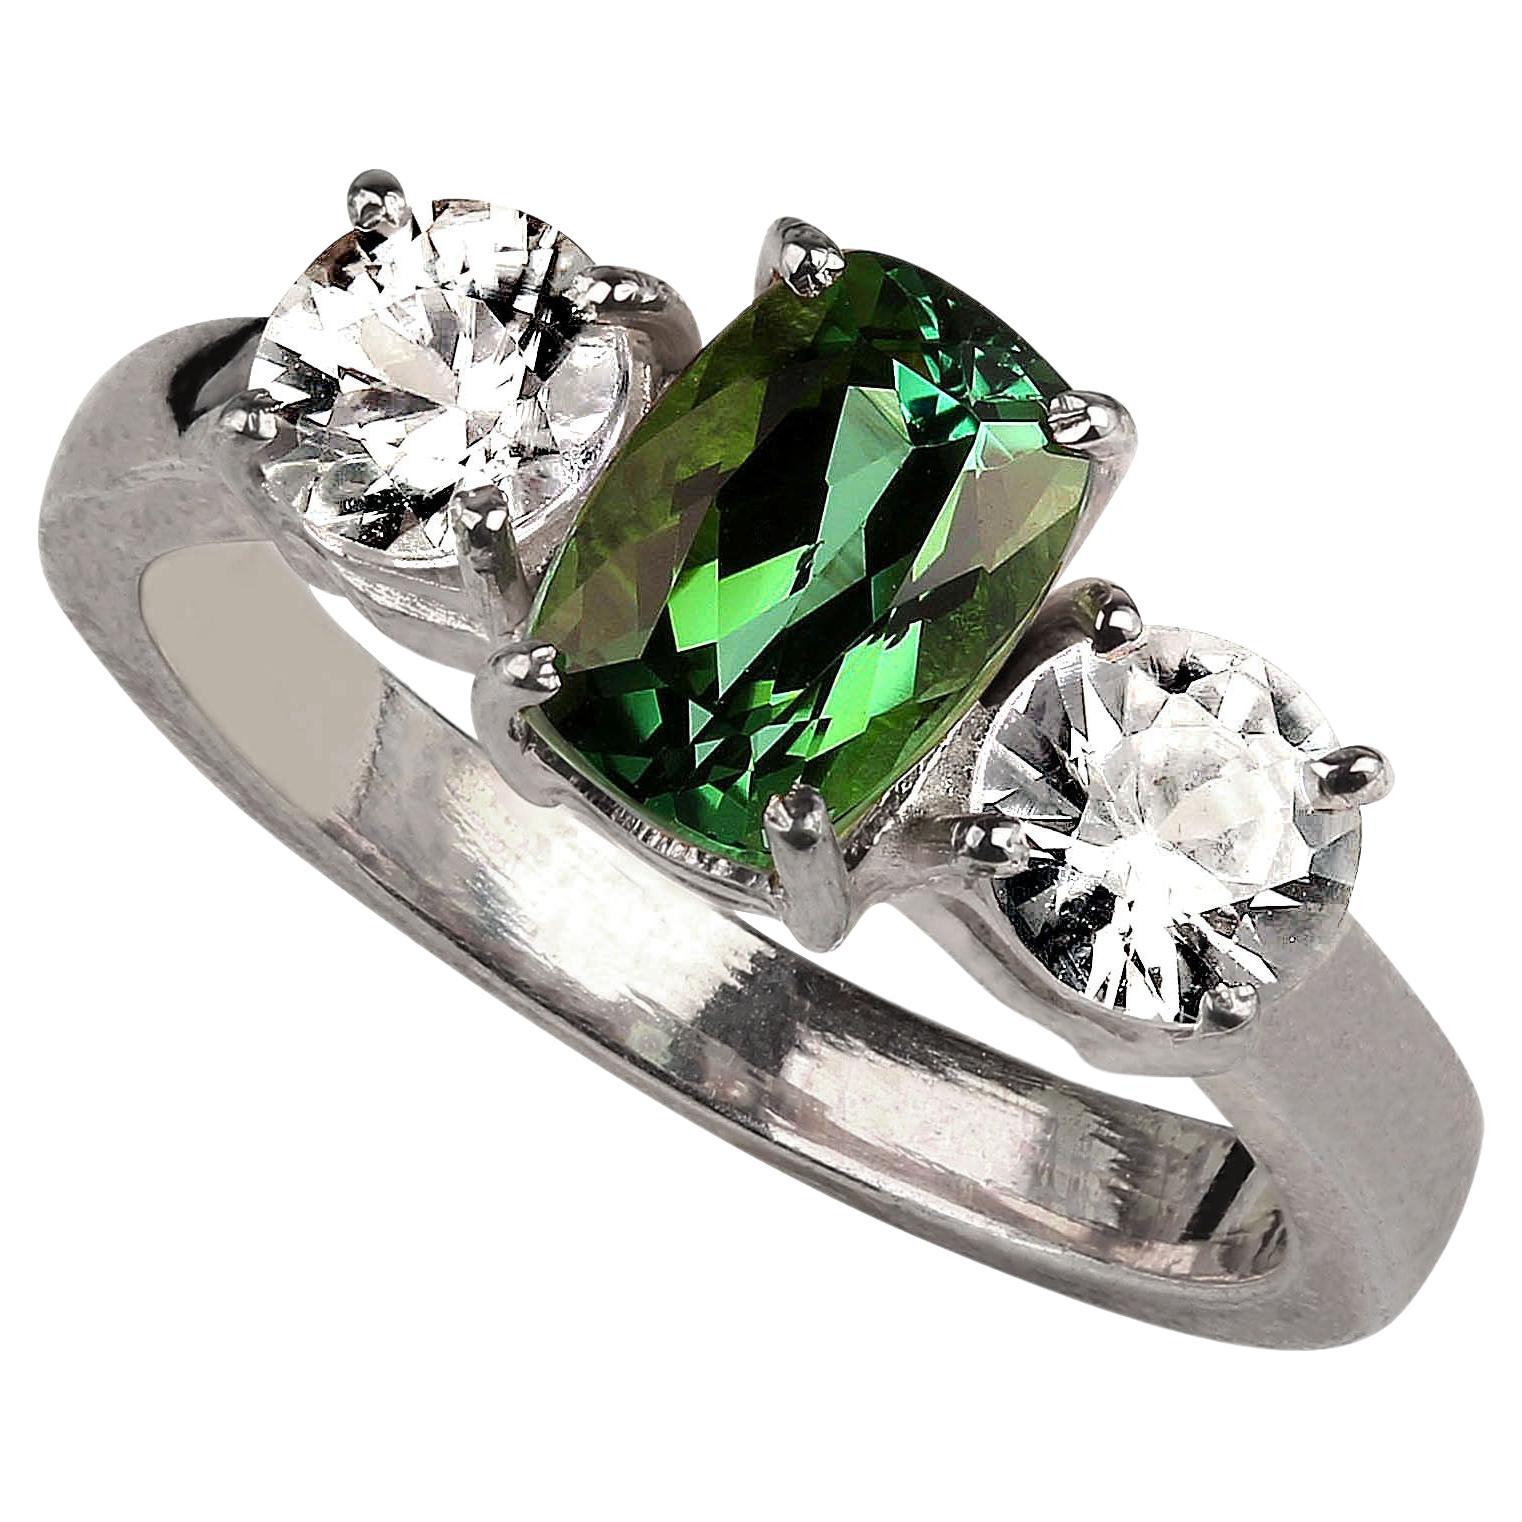 Gorgeous ring of brazilian oval green Tourmaline, 1.68 carats accented with two round genuine zircons, 1.44 ctw. It's difficult to say which sparkles more, the tourmaline or the zircons! This is a gorgeous ring. The Tourmaline came from one of our